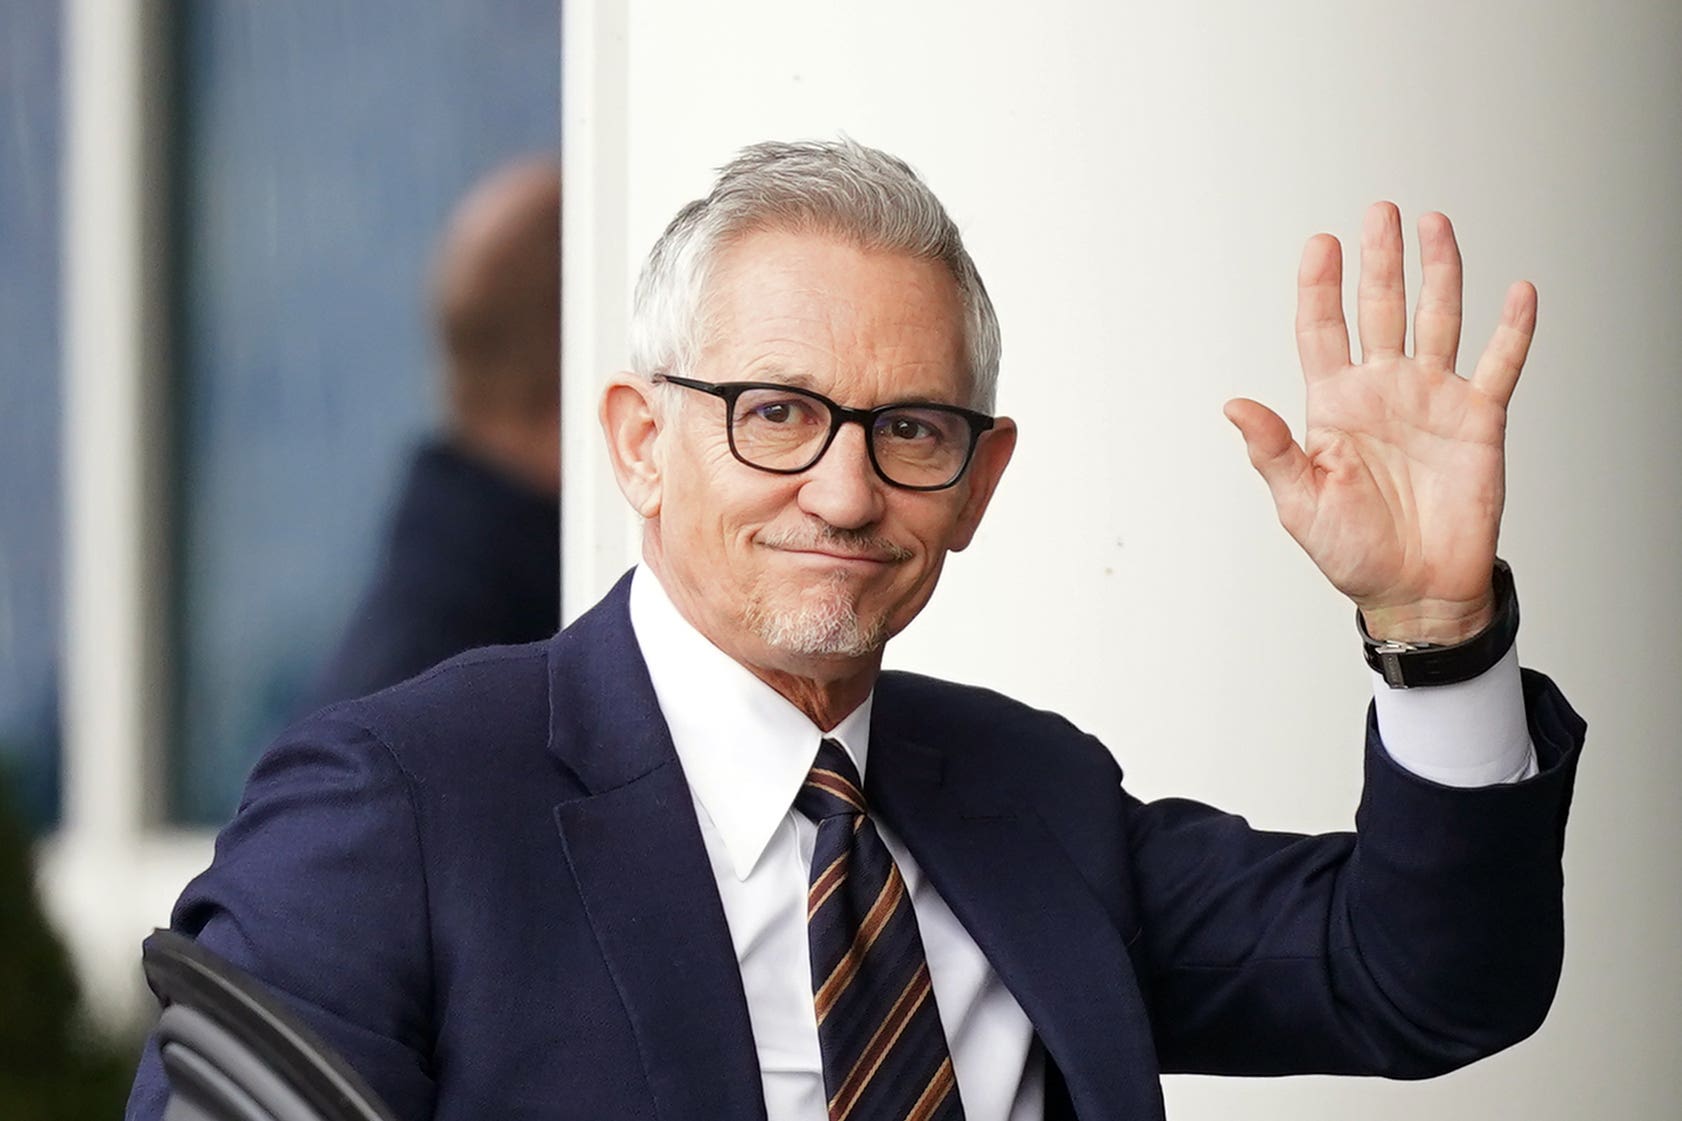 Gary Lineker attracted both criticism and praise for his comments on the government’s migrant policy